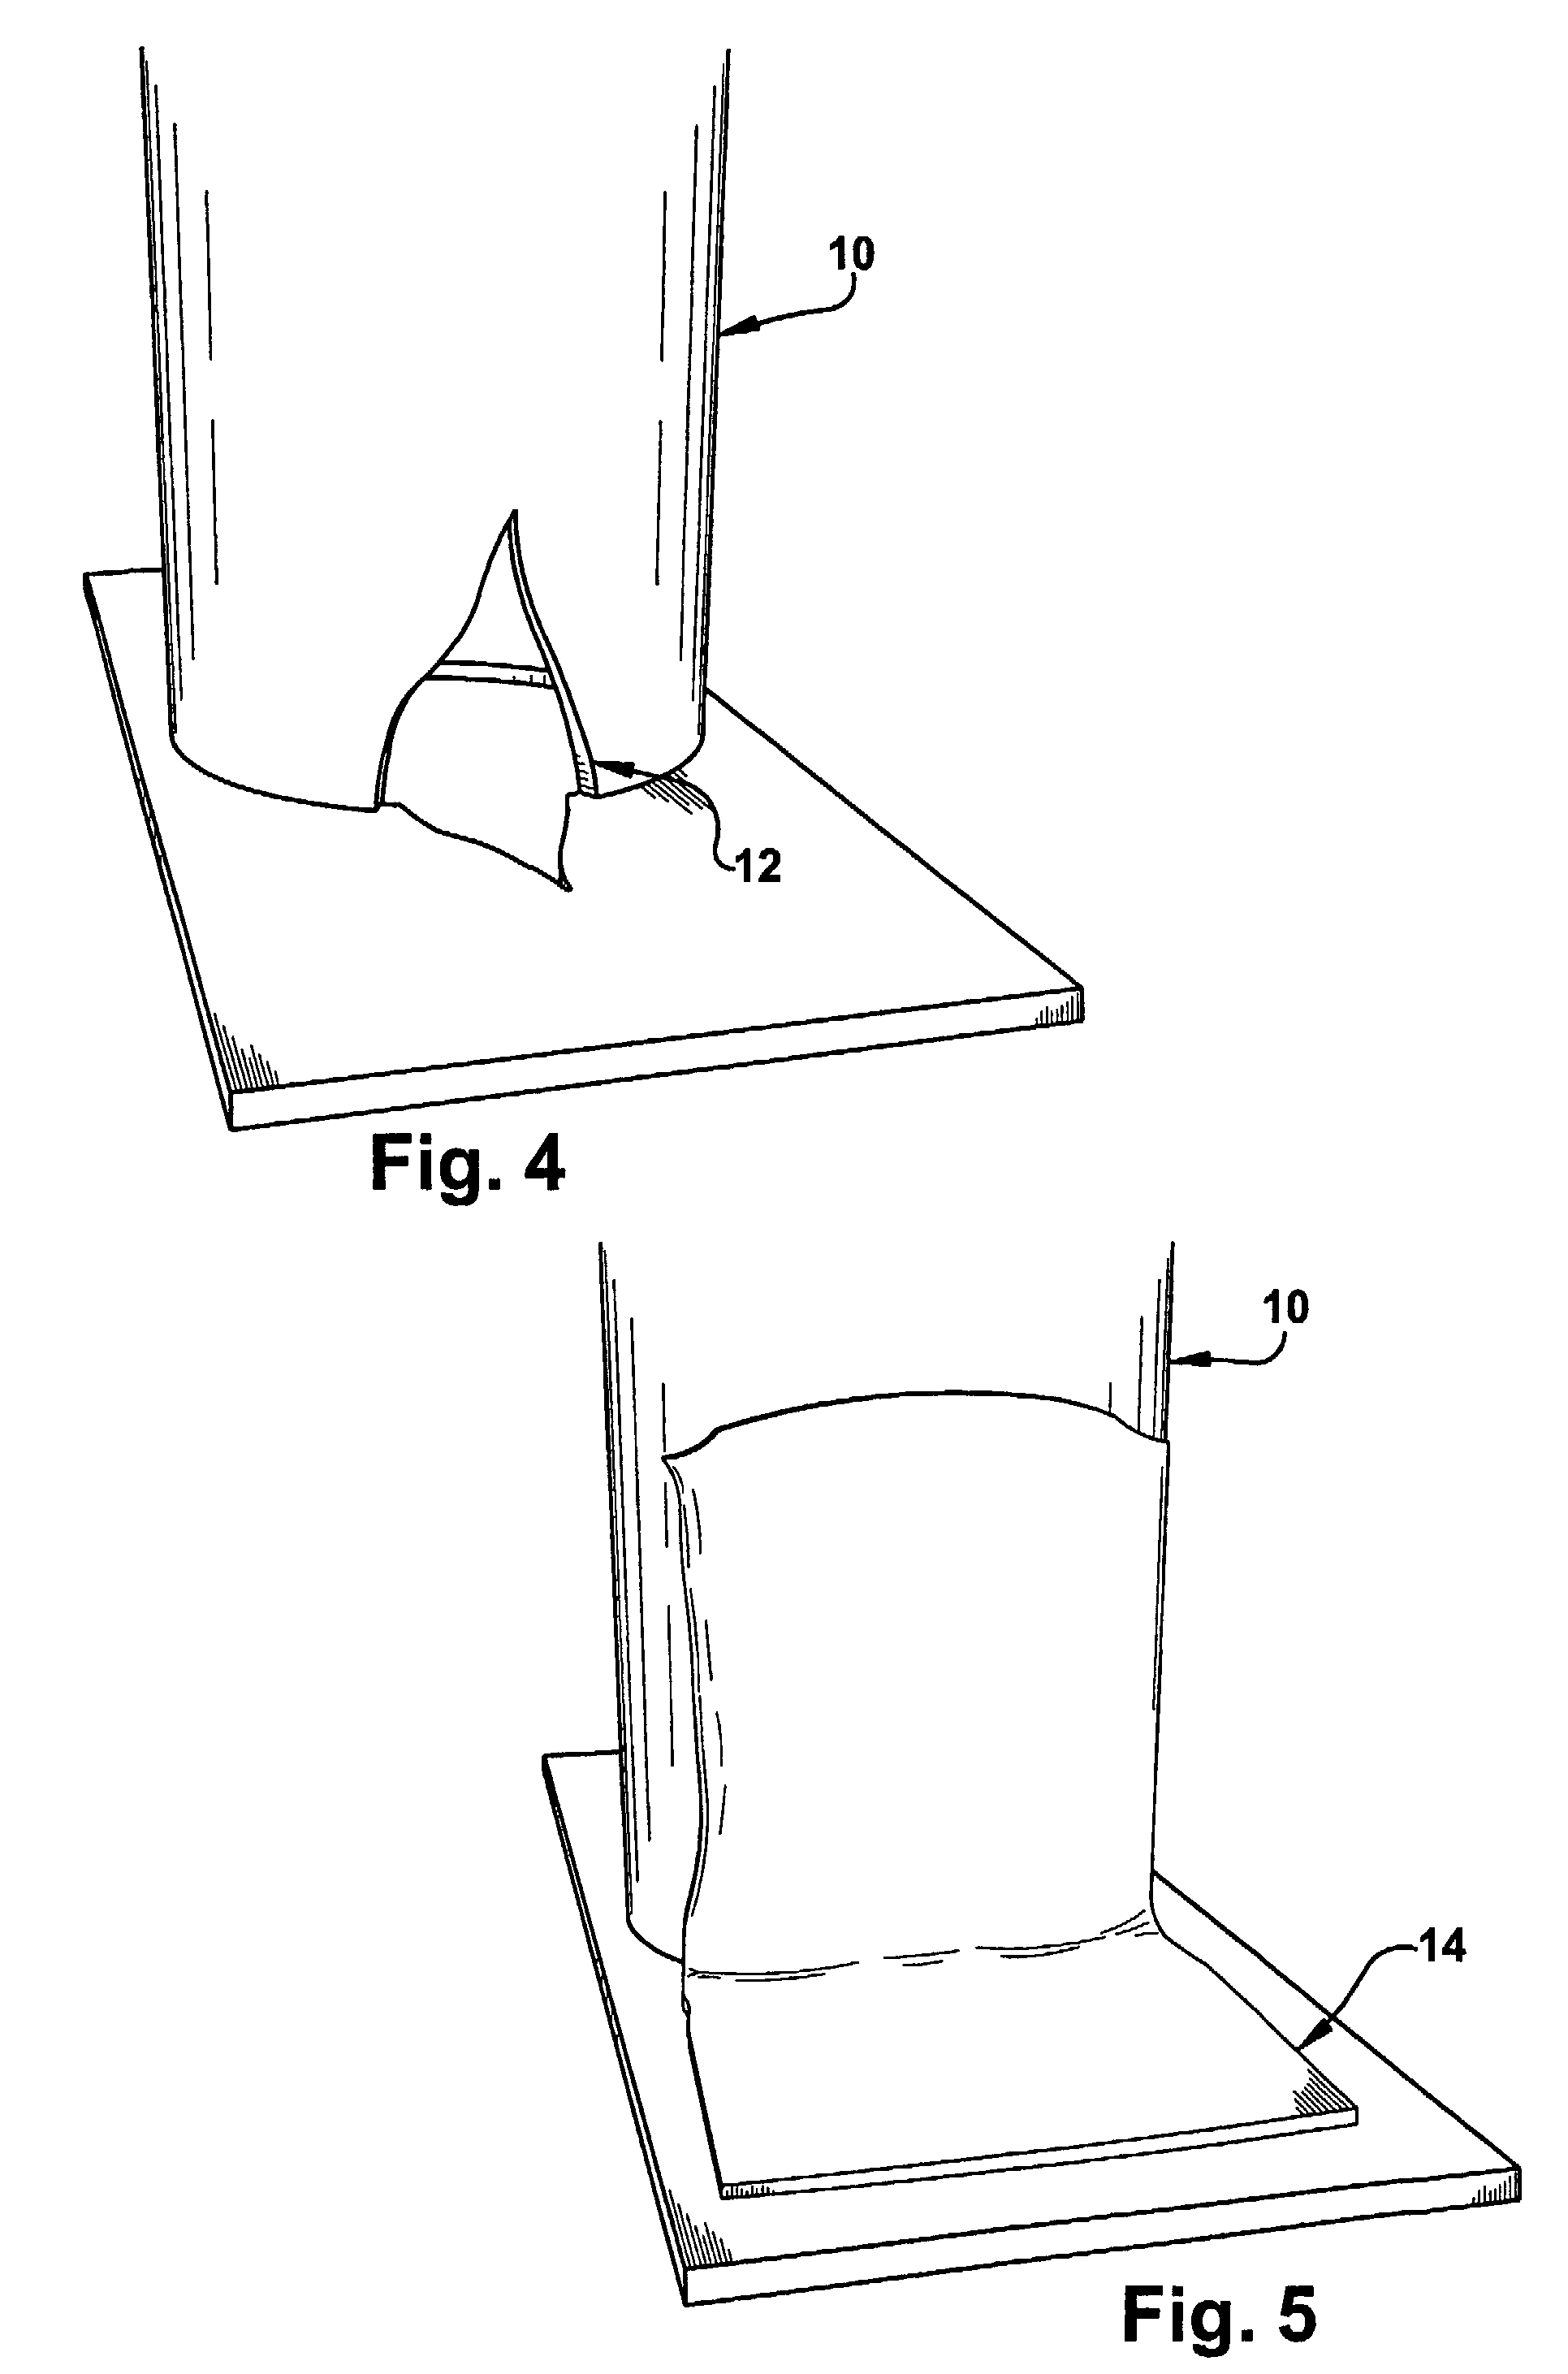 Method of Making and Using Shape Memory Polymer Composite Patches